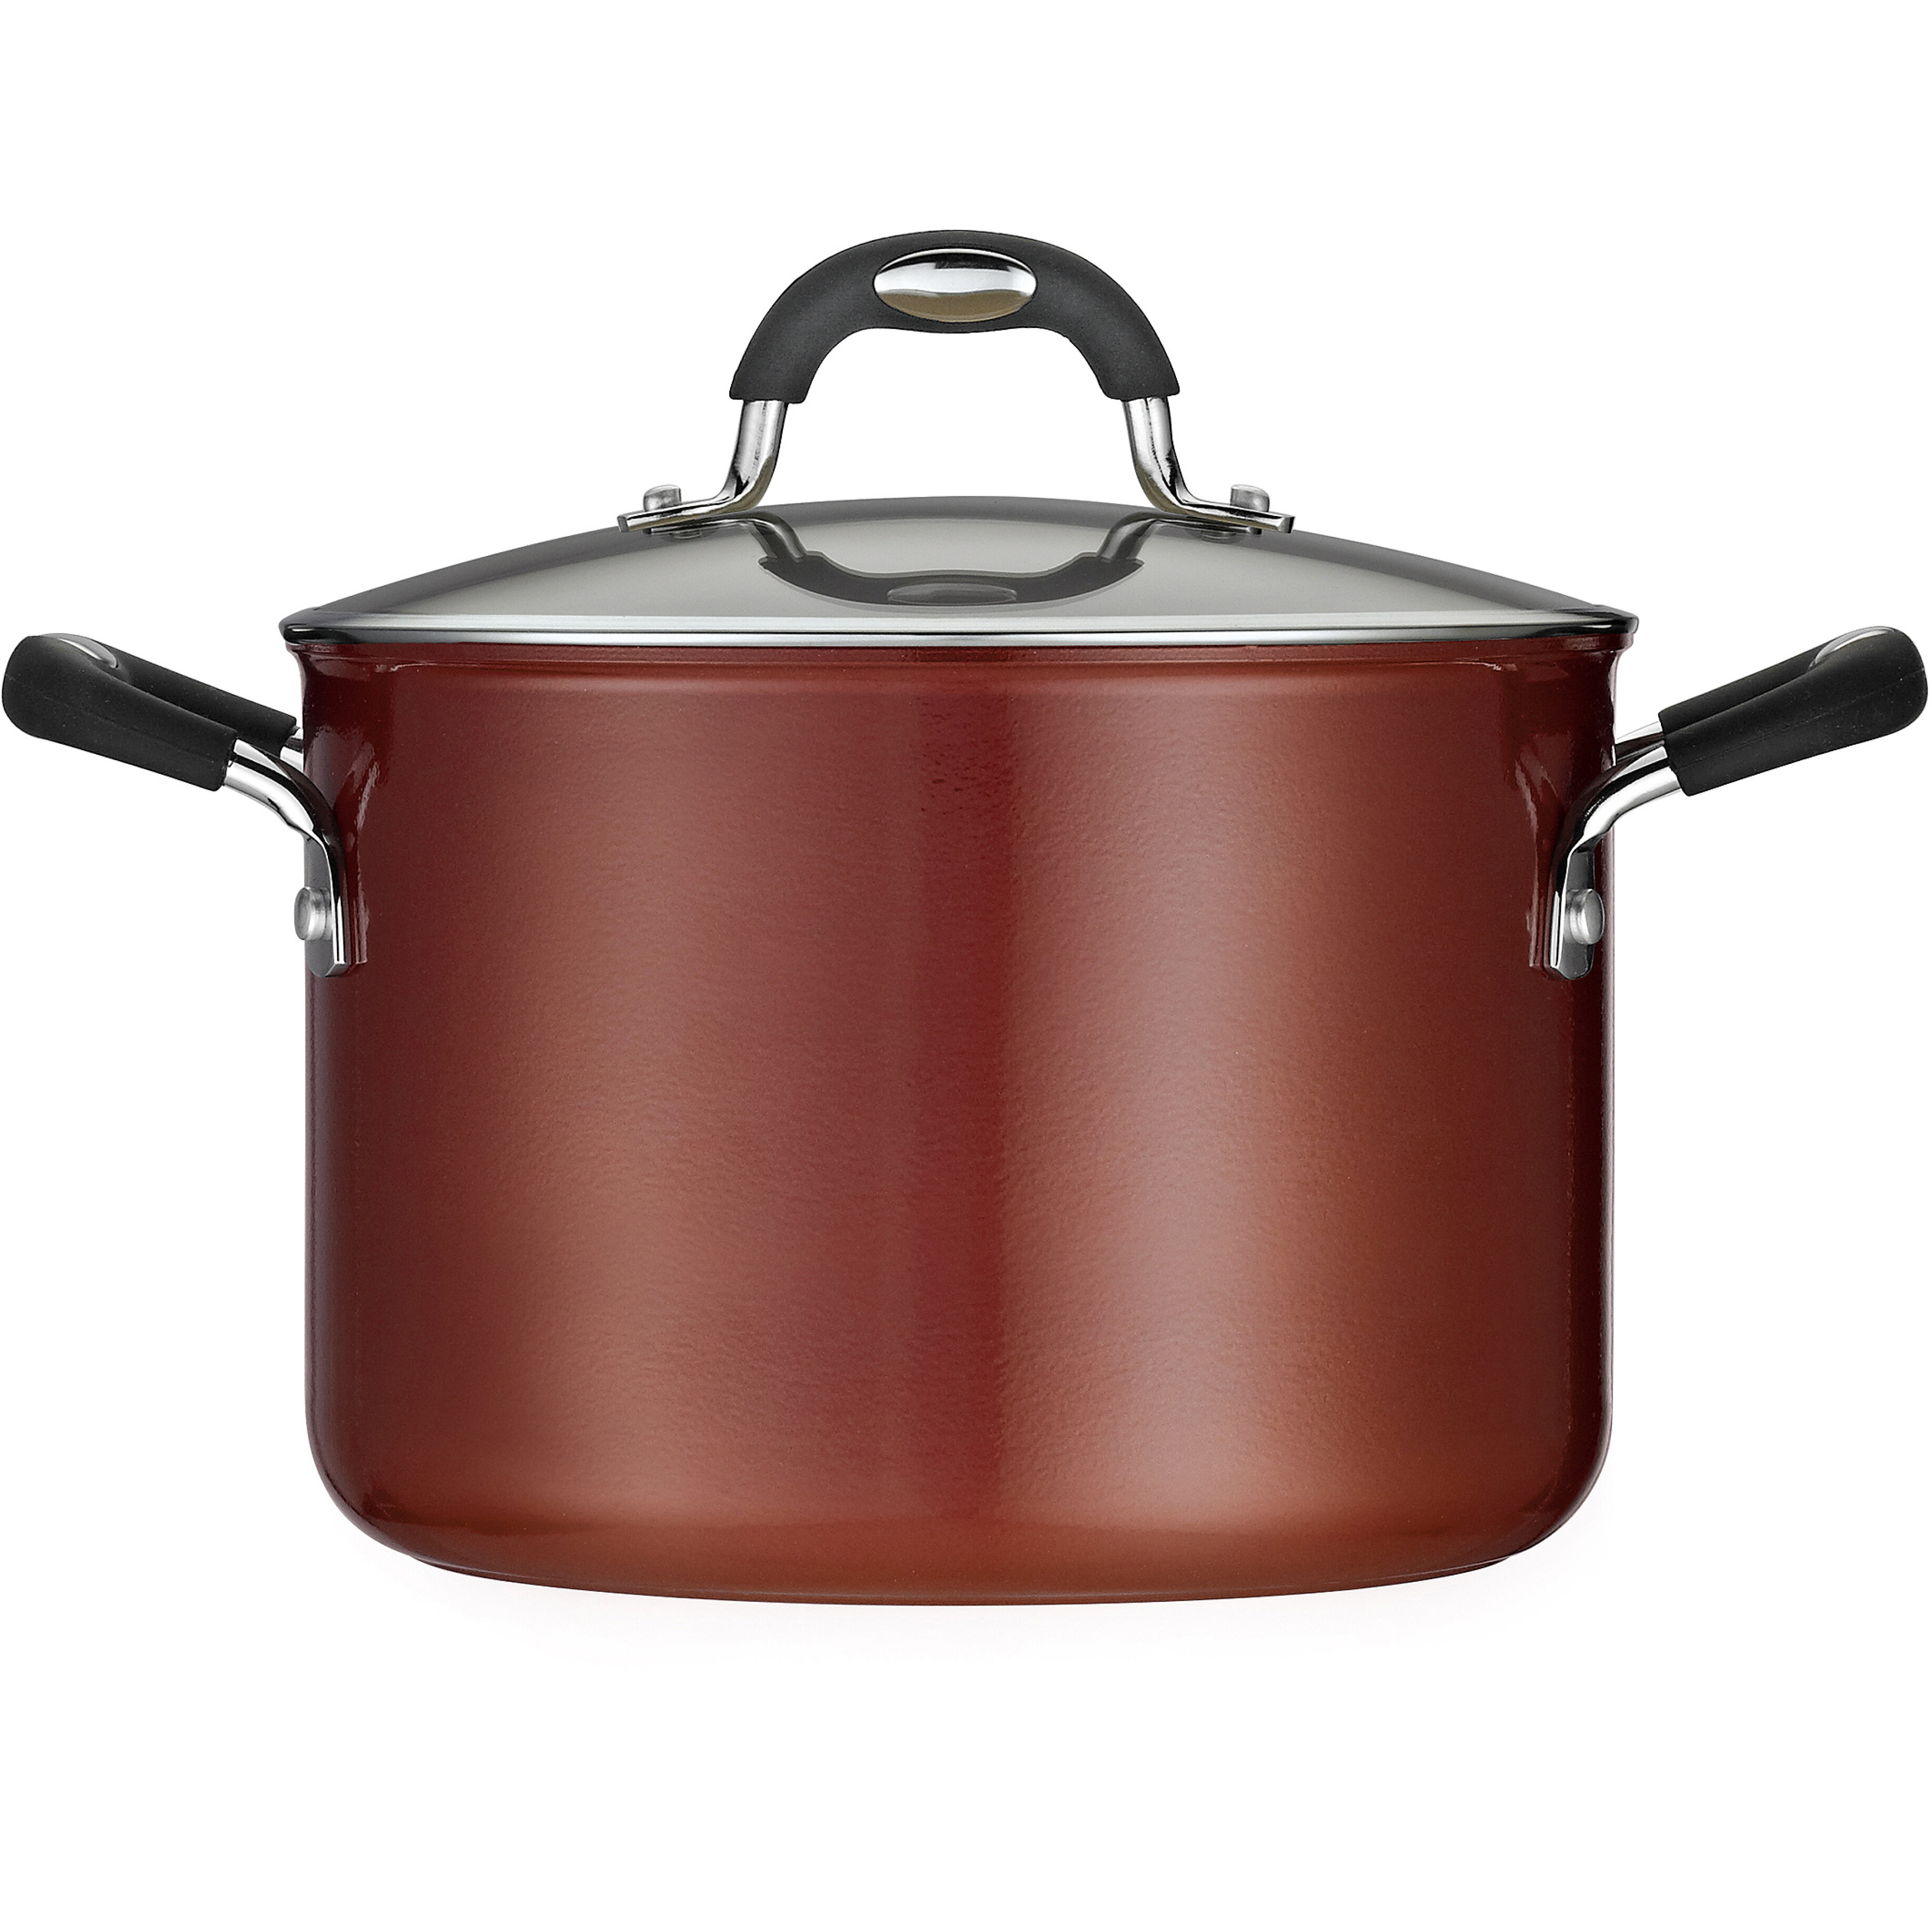 Tramontina Style Ceramica 6 qt. Stock Pot with Lid & Reviews